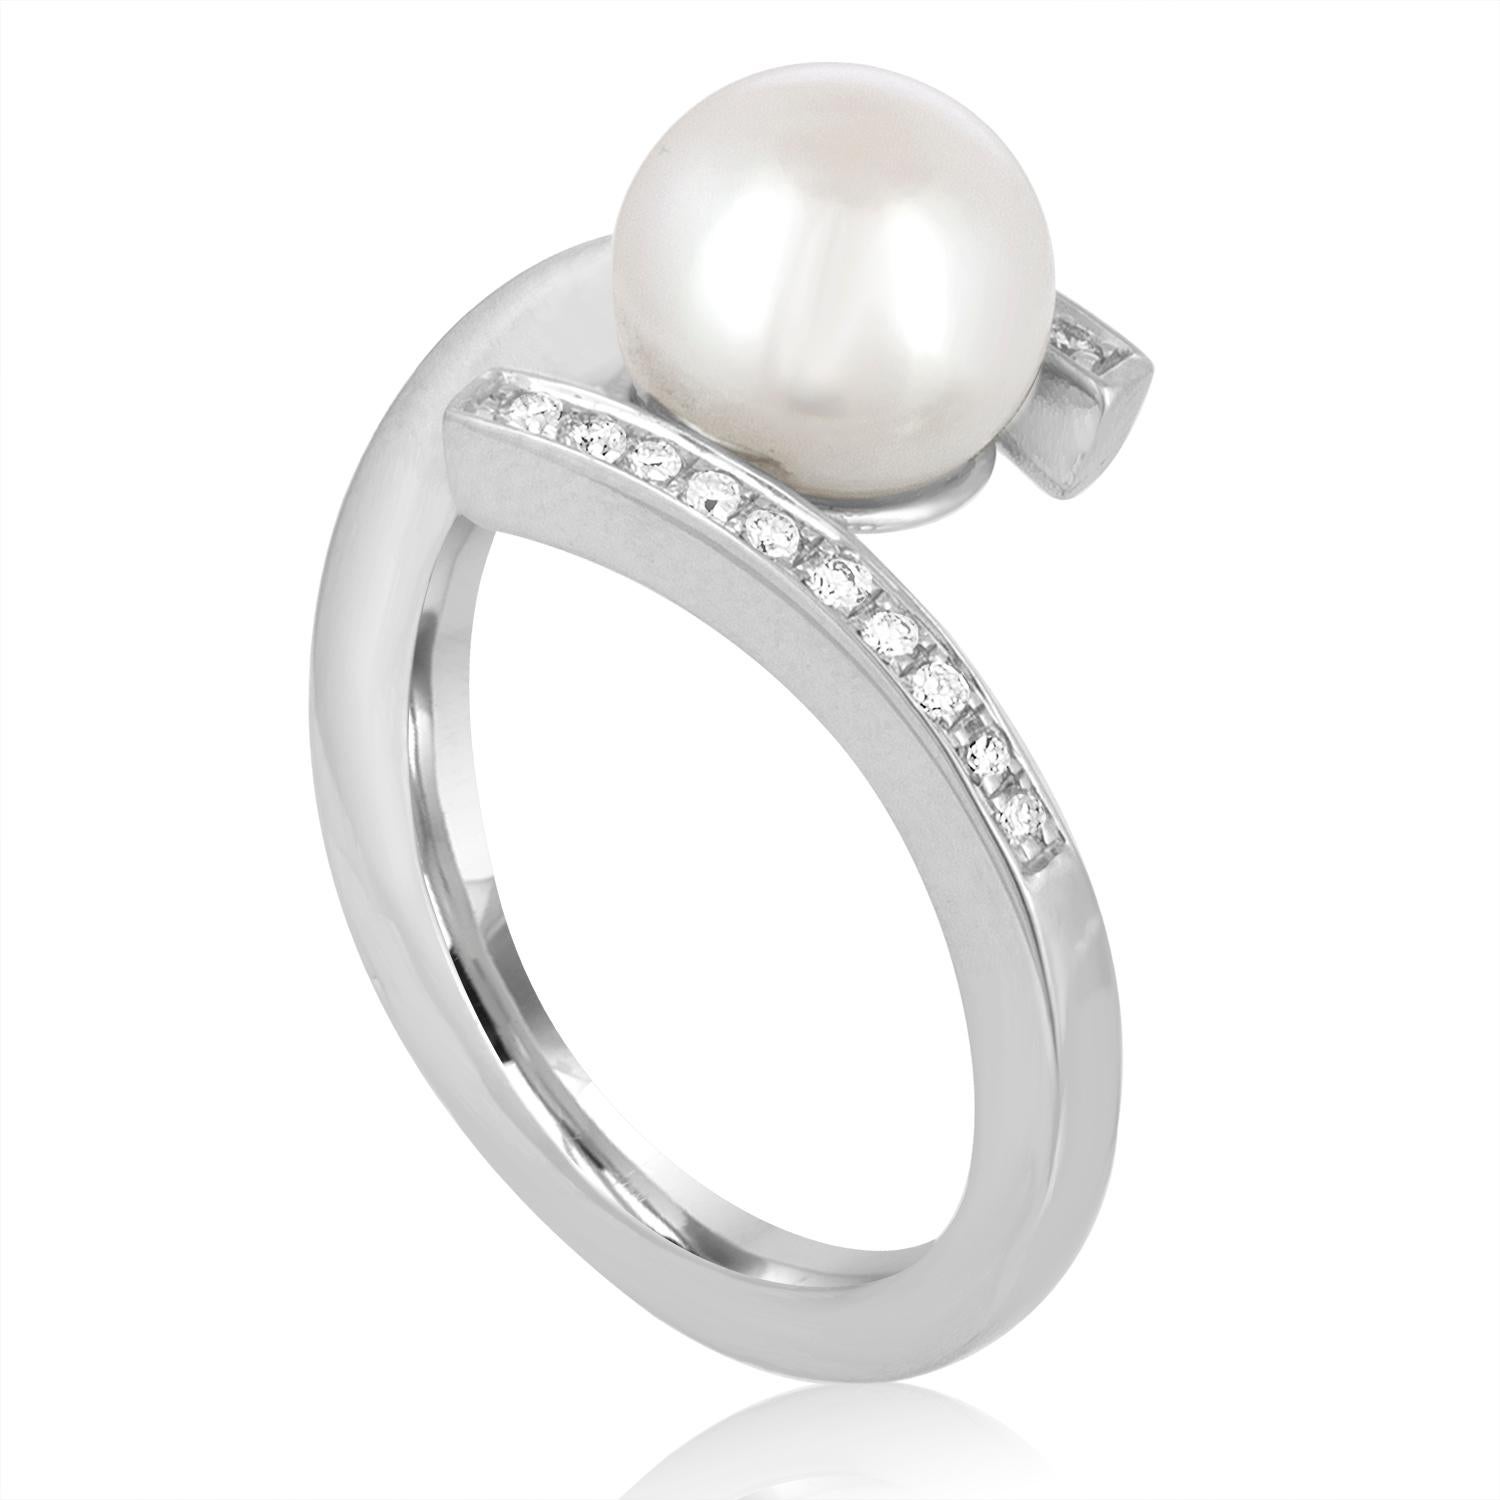 Beautiful Bypass Ring
The ring is 18K White Gold
There are 0.30 Carats in Diamonds F/G VS
The pearl is 8.3mm Freshwater Cultured
The ring is a size 6, sizable
The ring weighs 5.9 grams